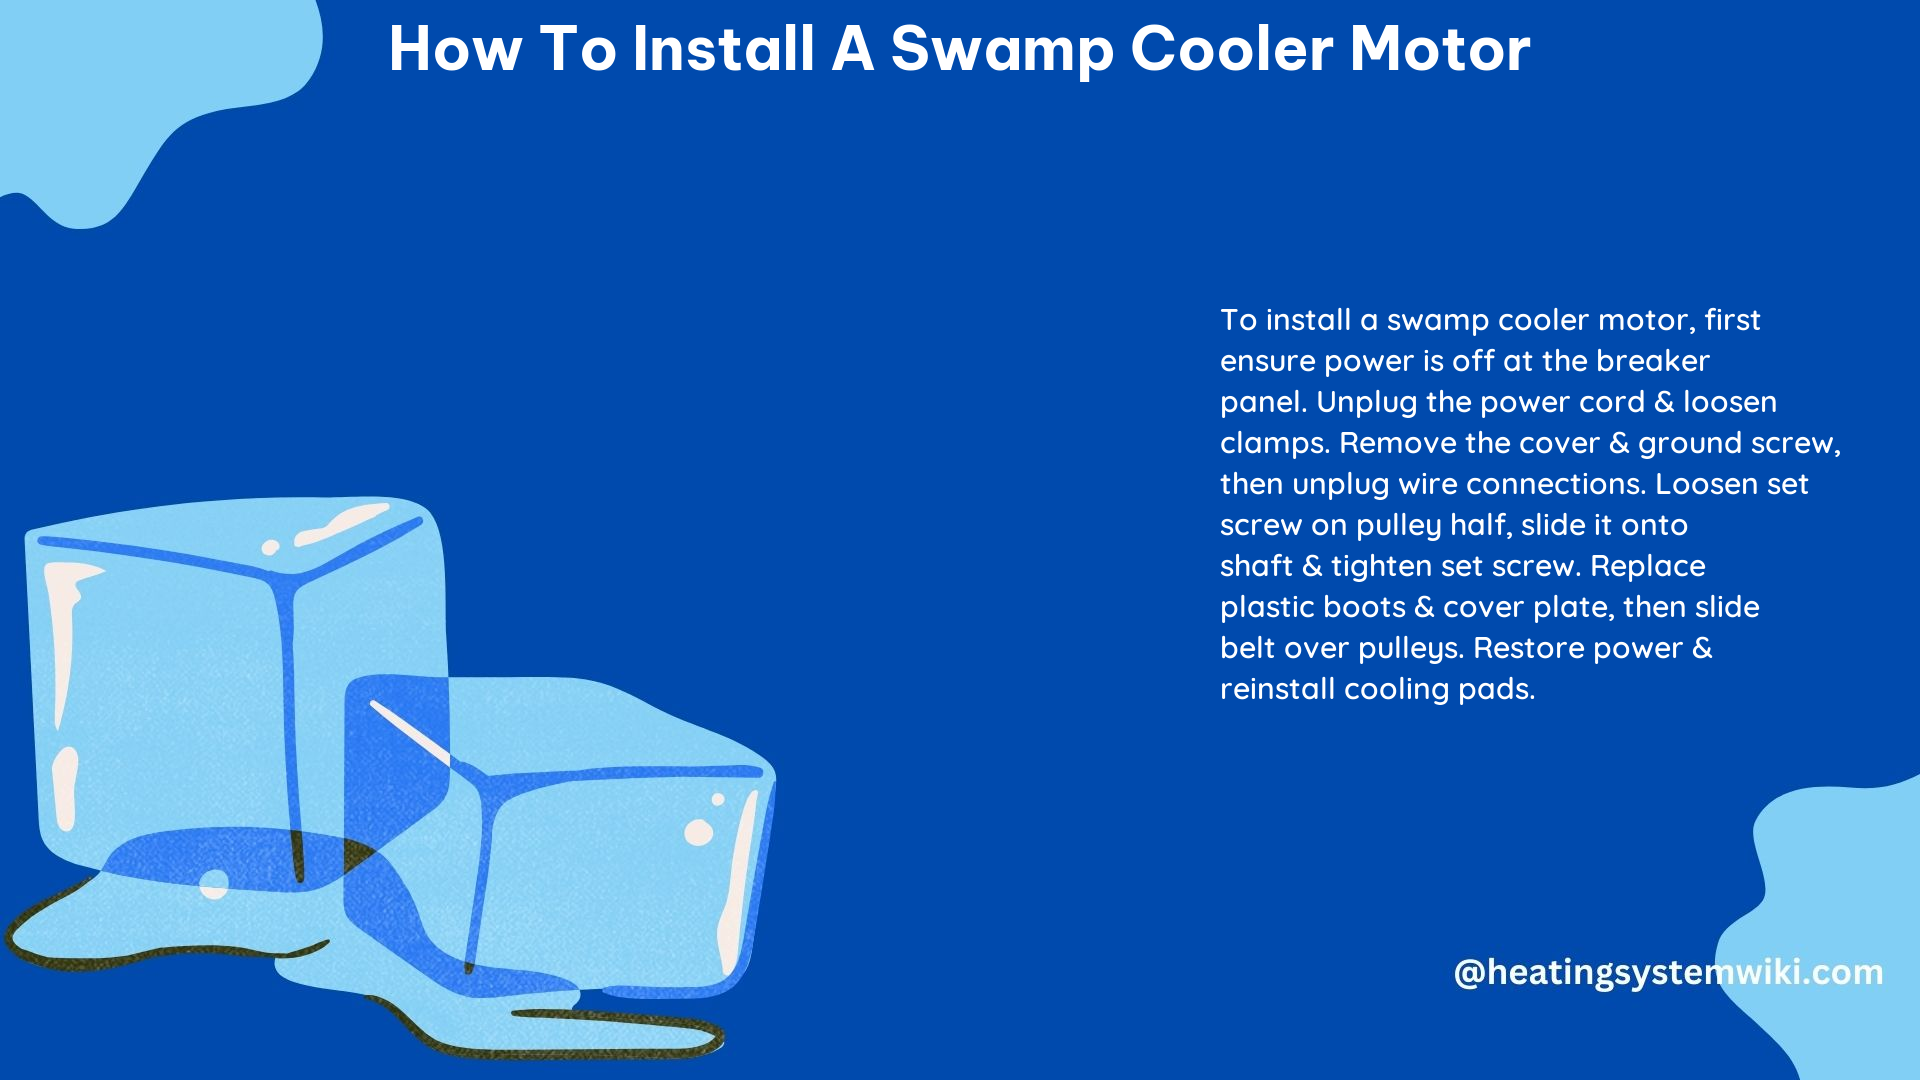 How to Install a Swamp Cooler Motor